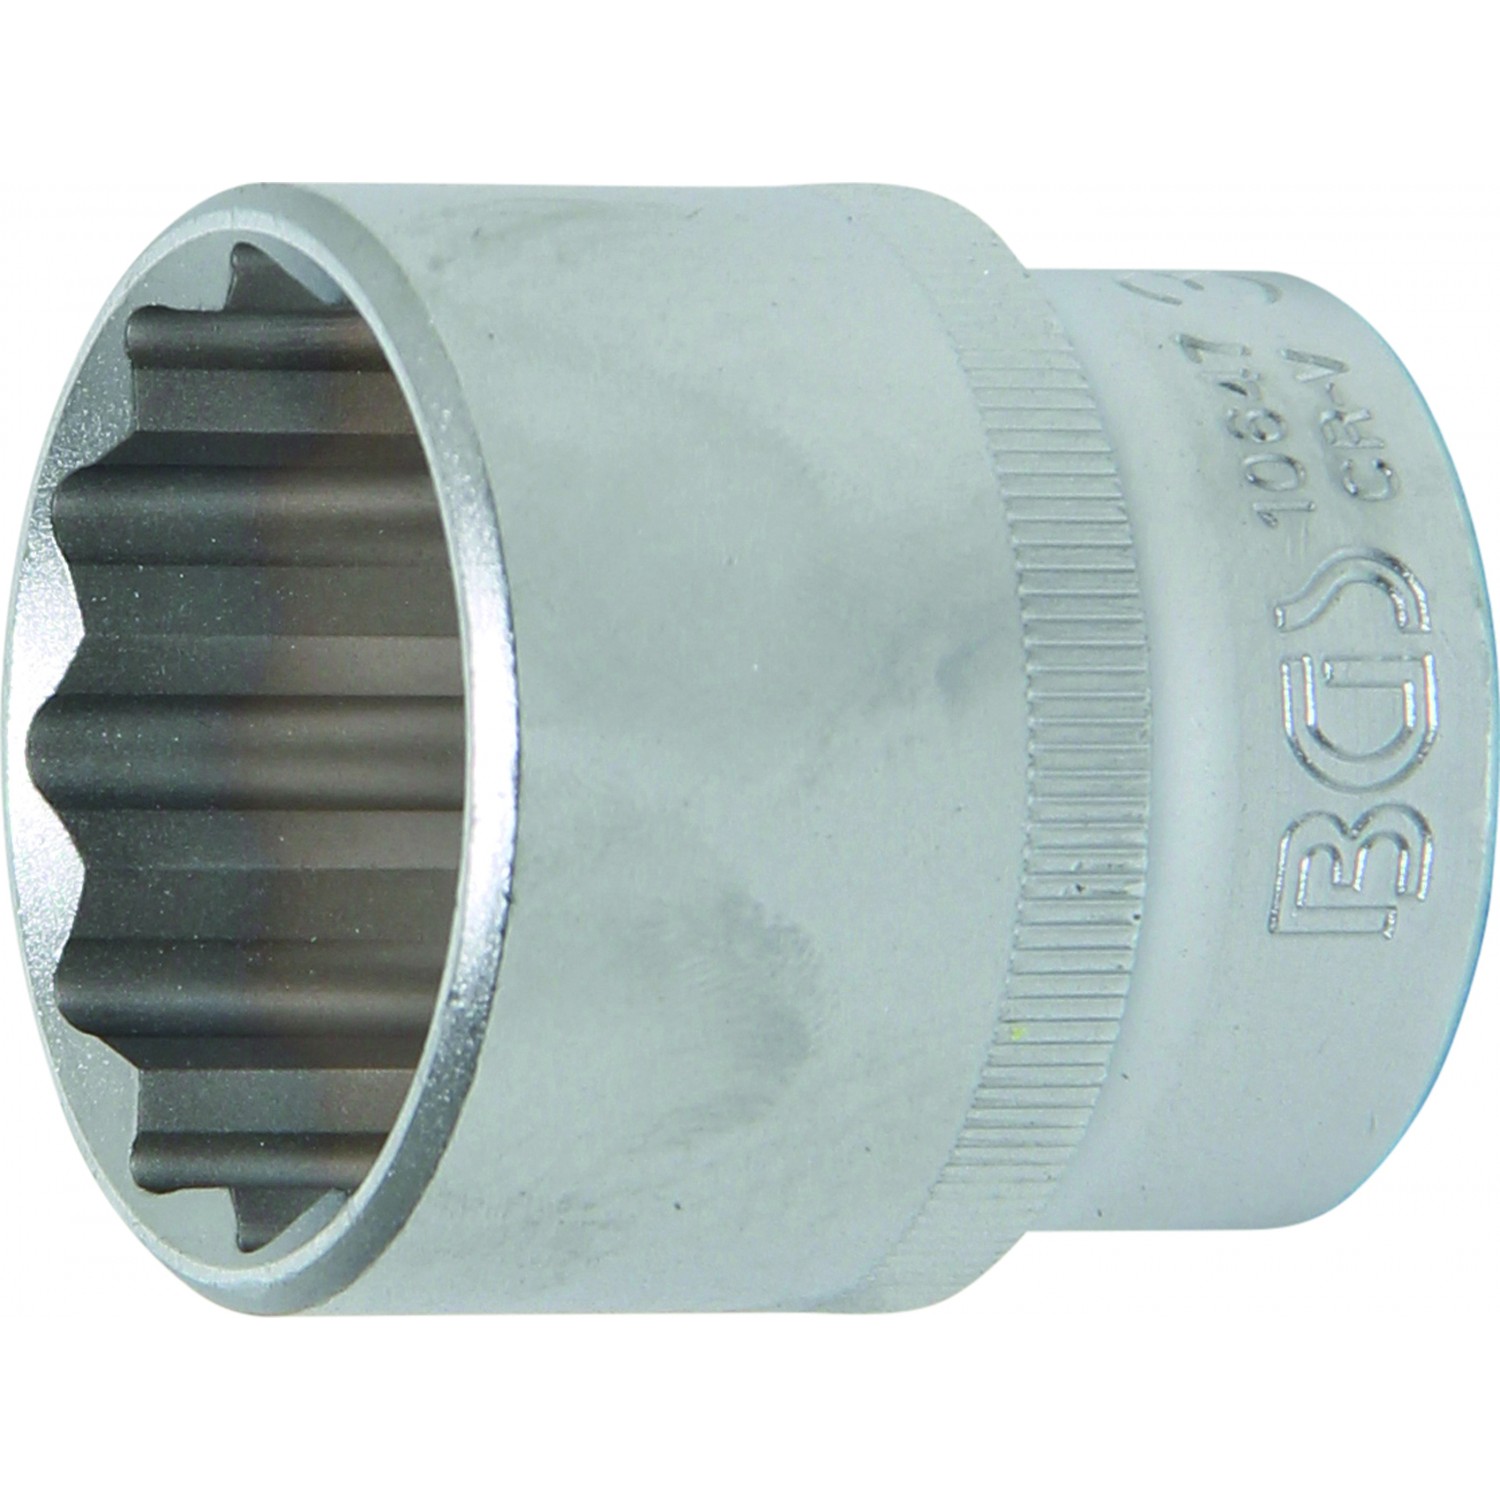 12-point | 12.5 mm (1/2") Drive | 32 mm (10647)